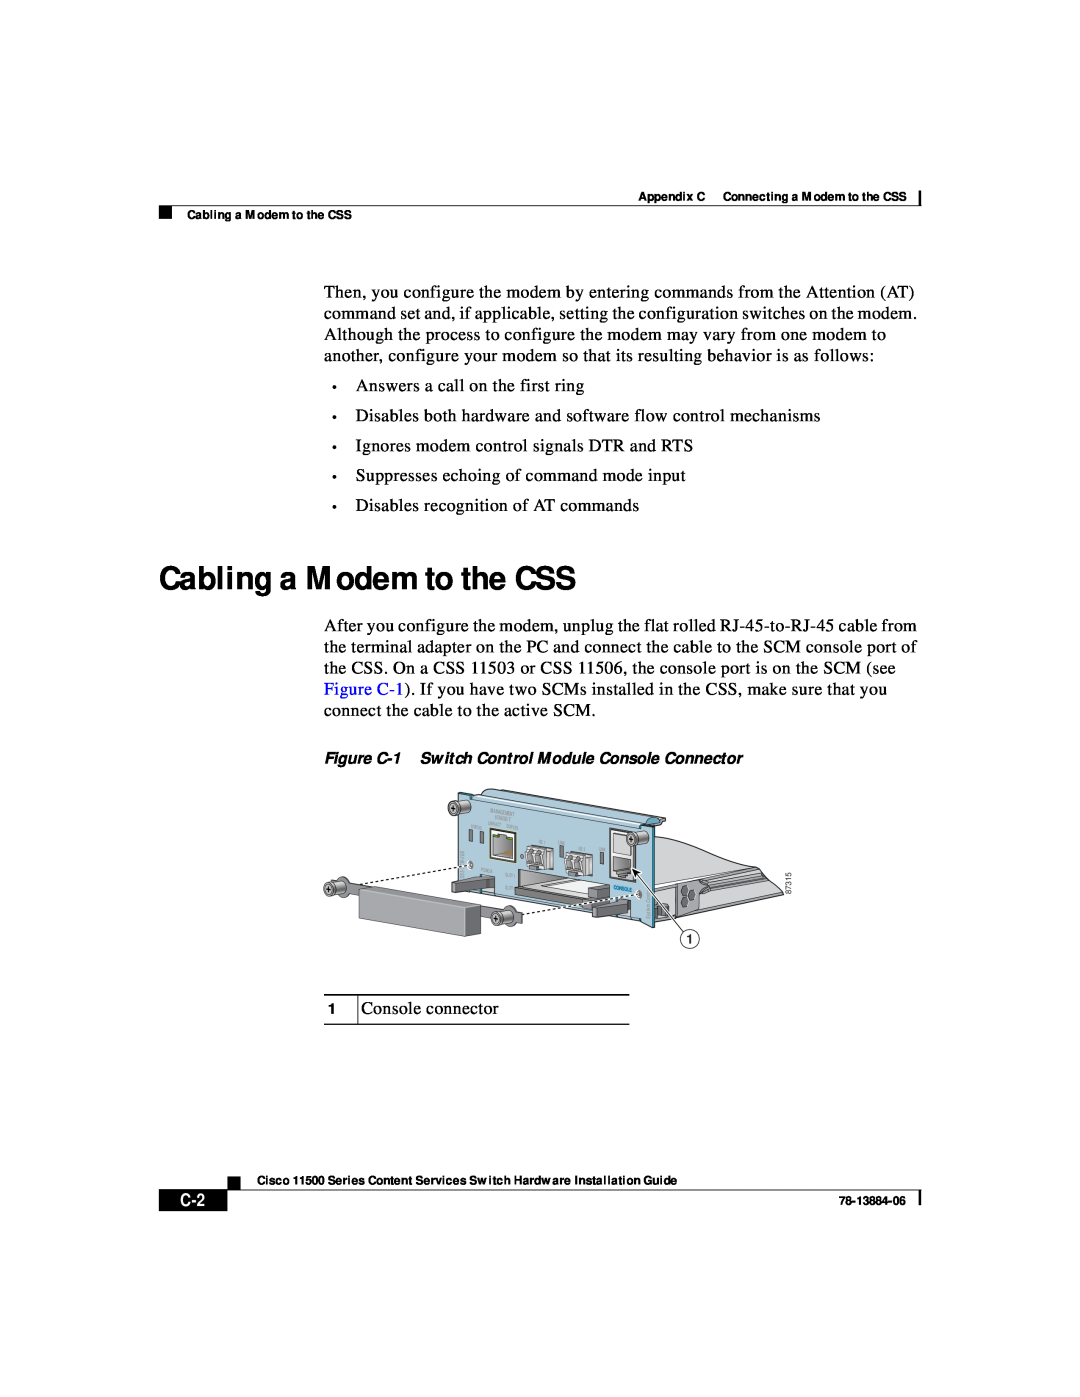 Cisco Systems 11500 Series manual Cabling a Modem to the CSS 